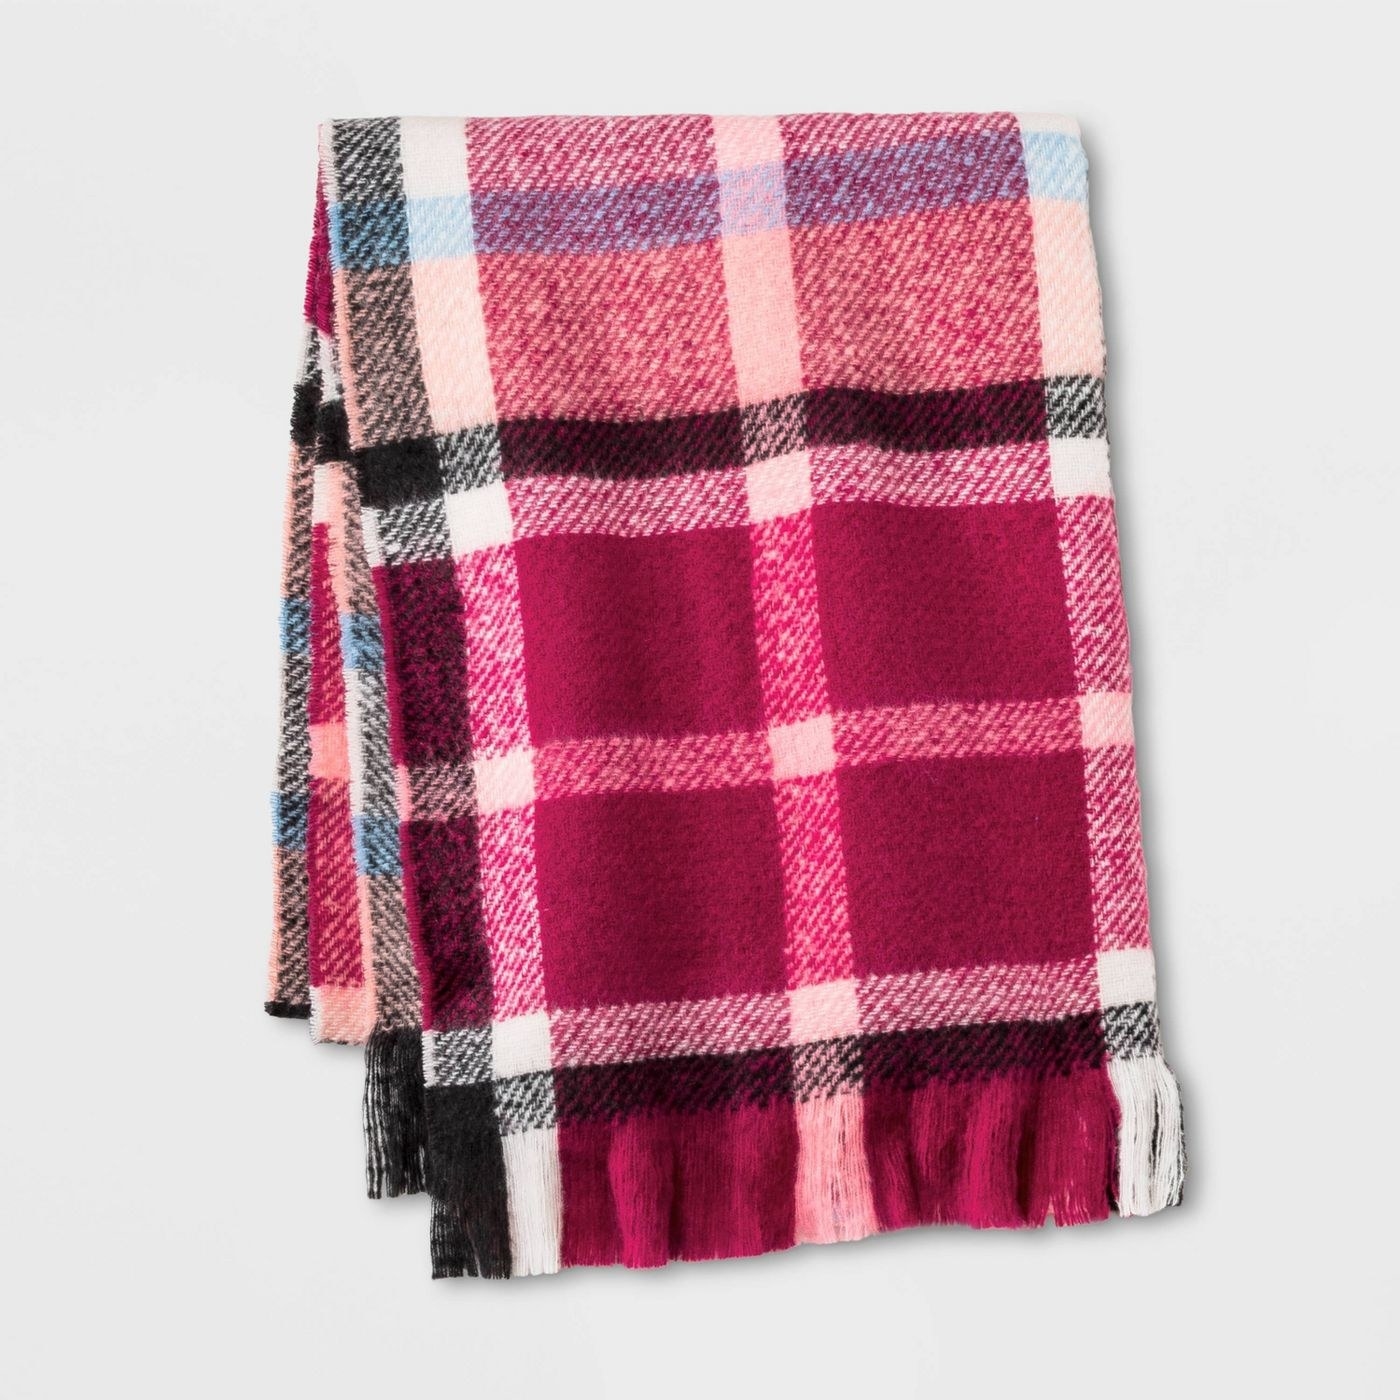 The blanket scarf in fuchsia, light pink, and black plaid